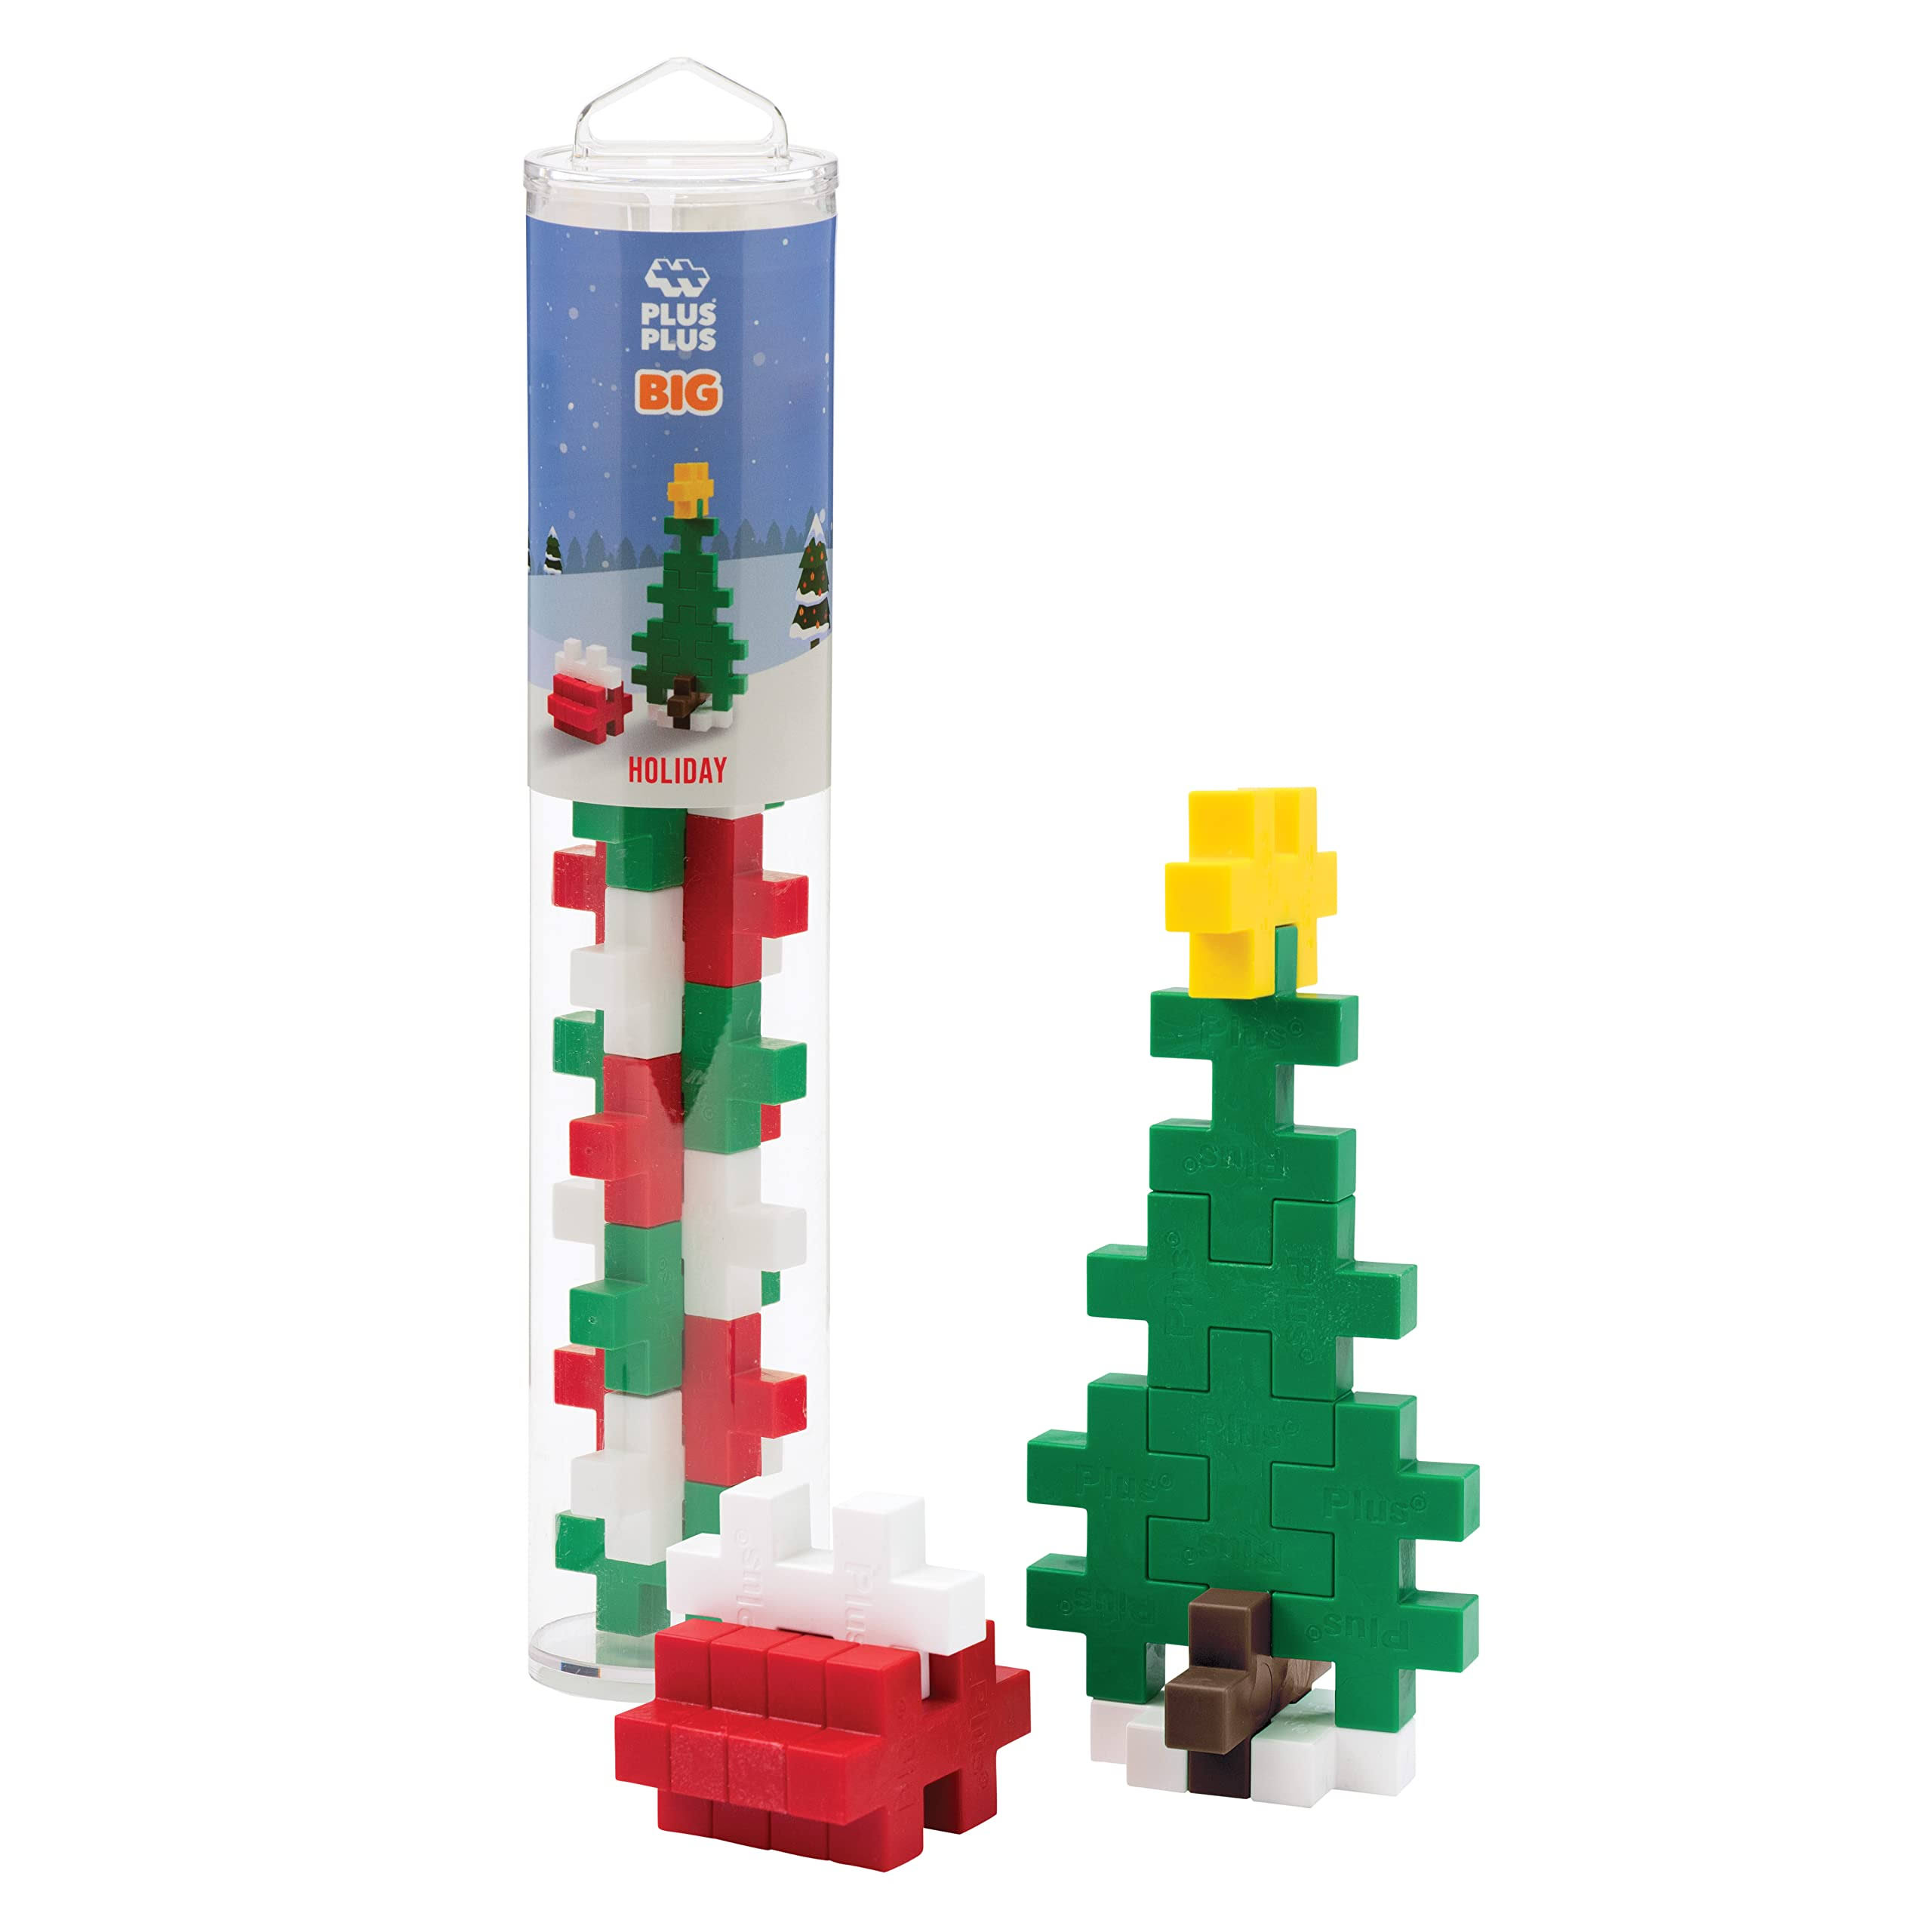 Plus Plus Big - Instructed Tube - 15 Piece Holiday Mix - Construction Building Stem / Steam Toy